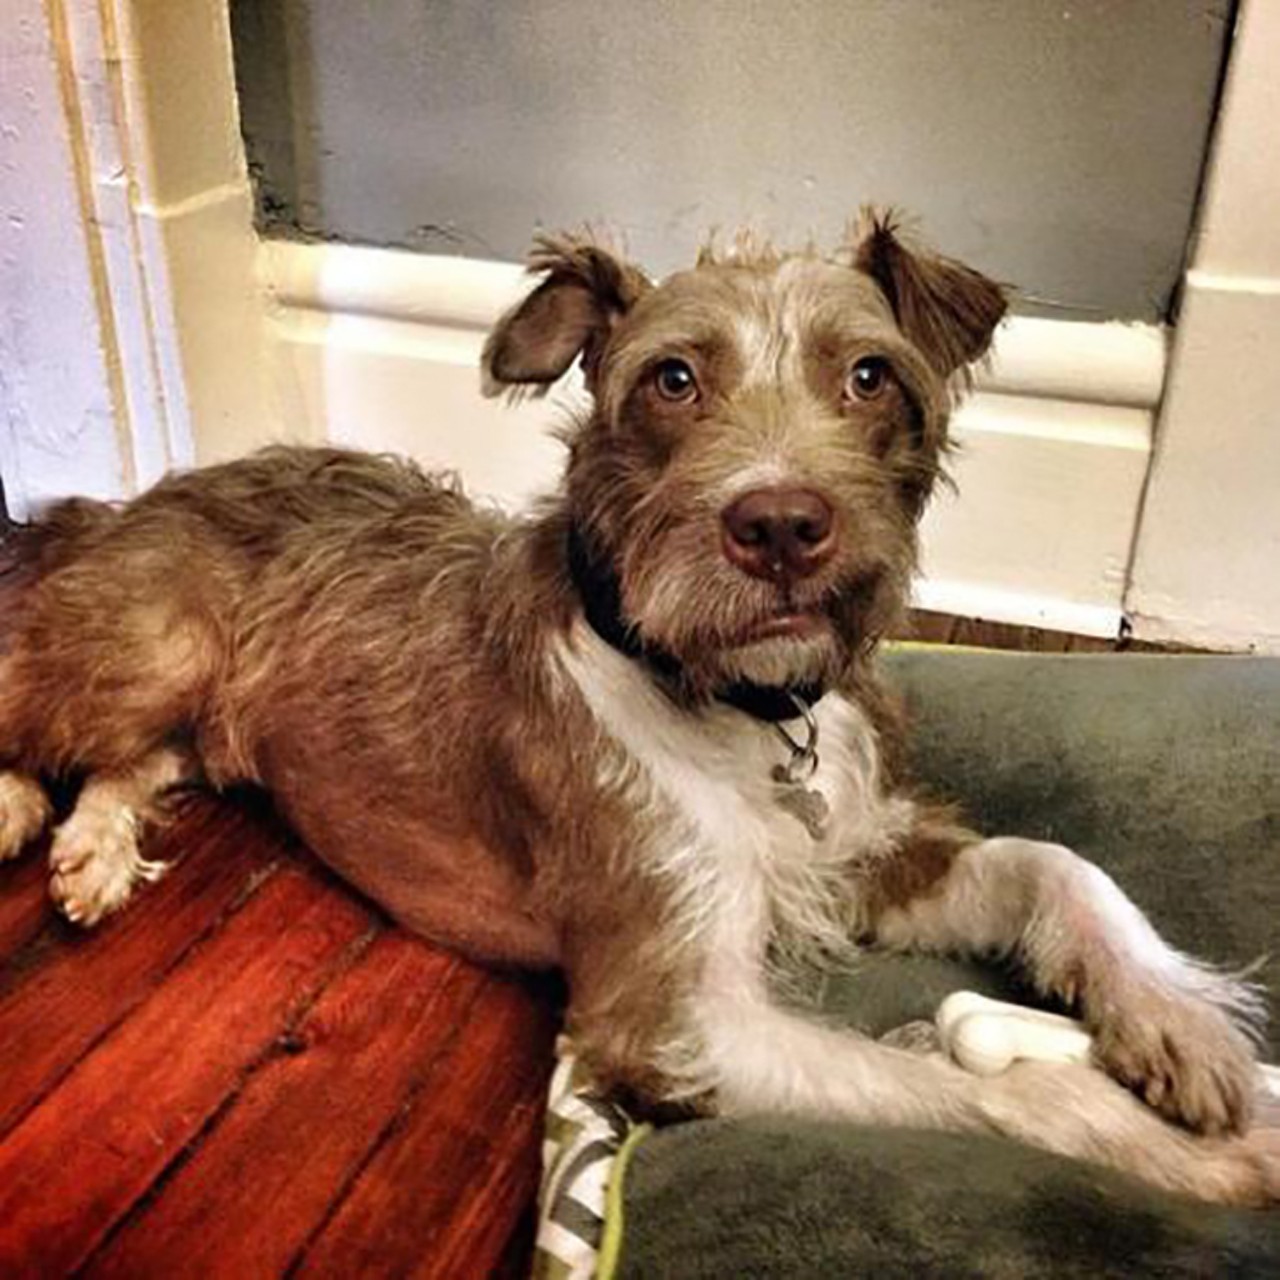 Murphy
Age: 7 years old | Breed: Wirehaired Pointing Griffon Mix | Sex: Male | Rescue: Dream House Rescue 
Photo via DreamHouseRescue.org